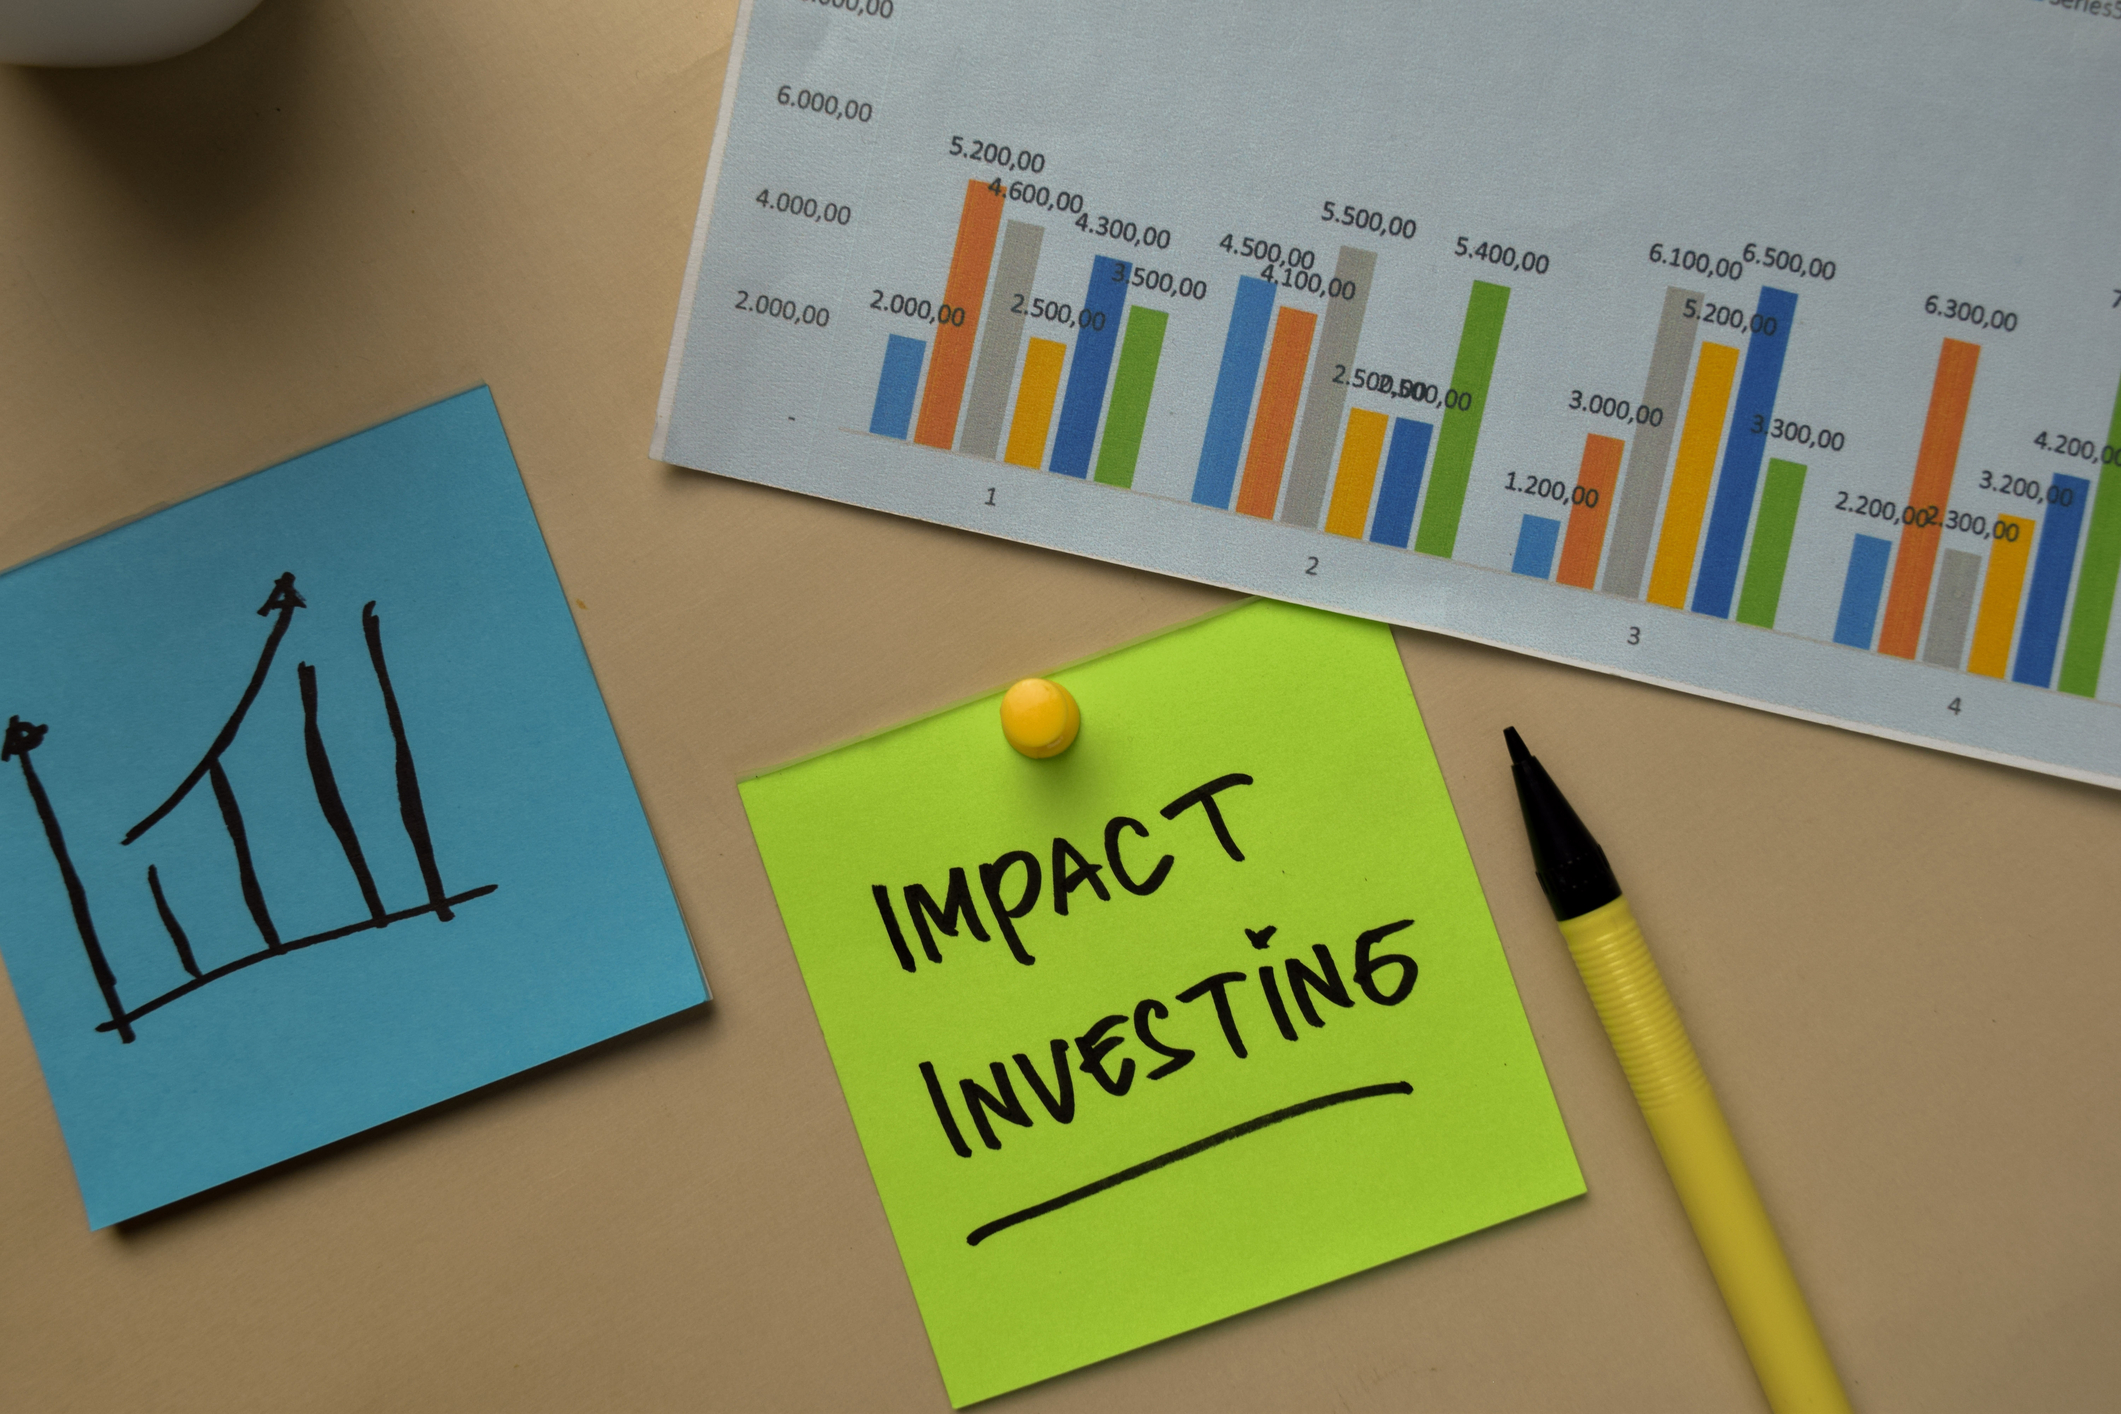 Impact investing provides opportunities to support global initiatives that may be overlooked.